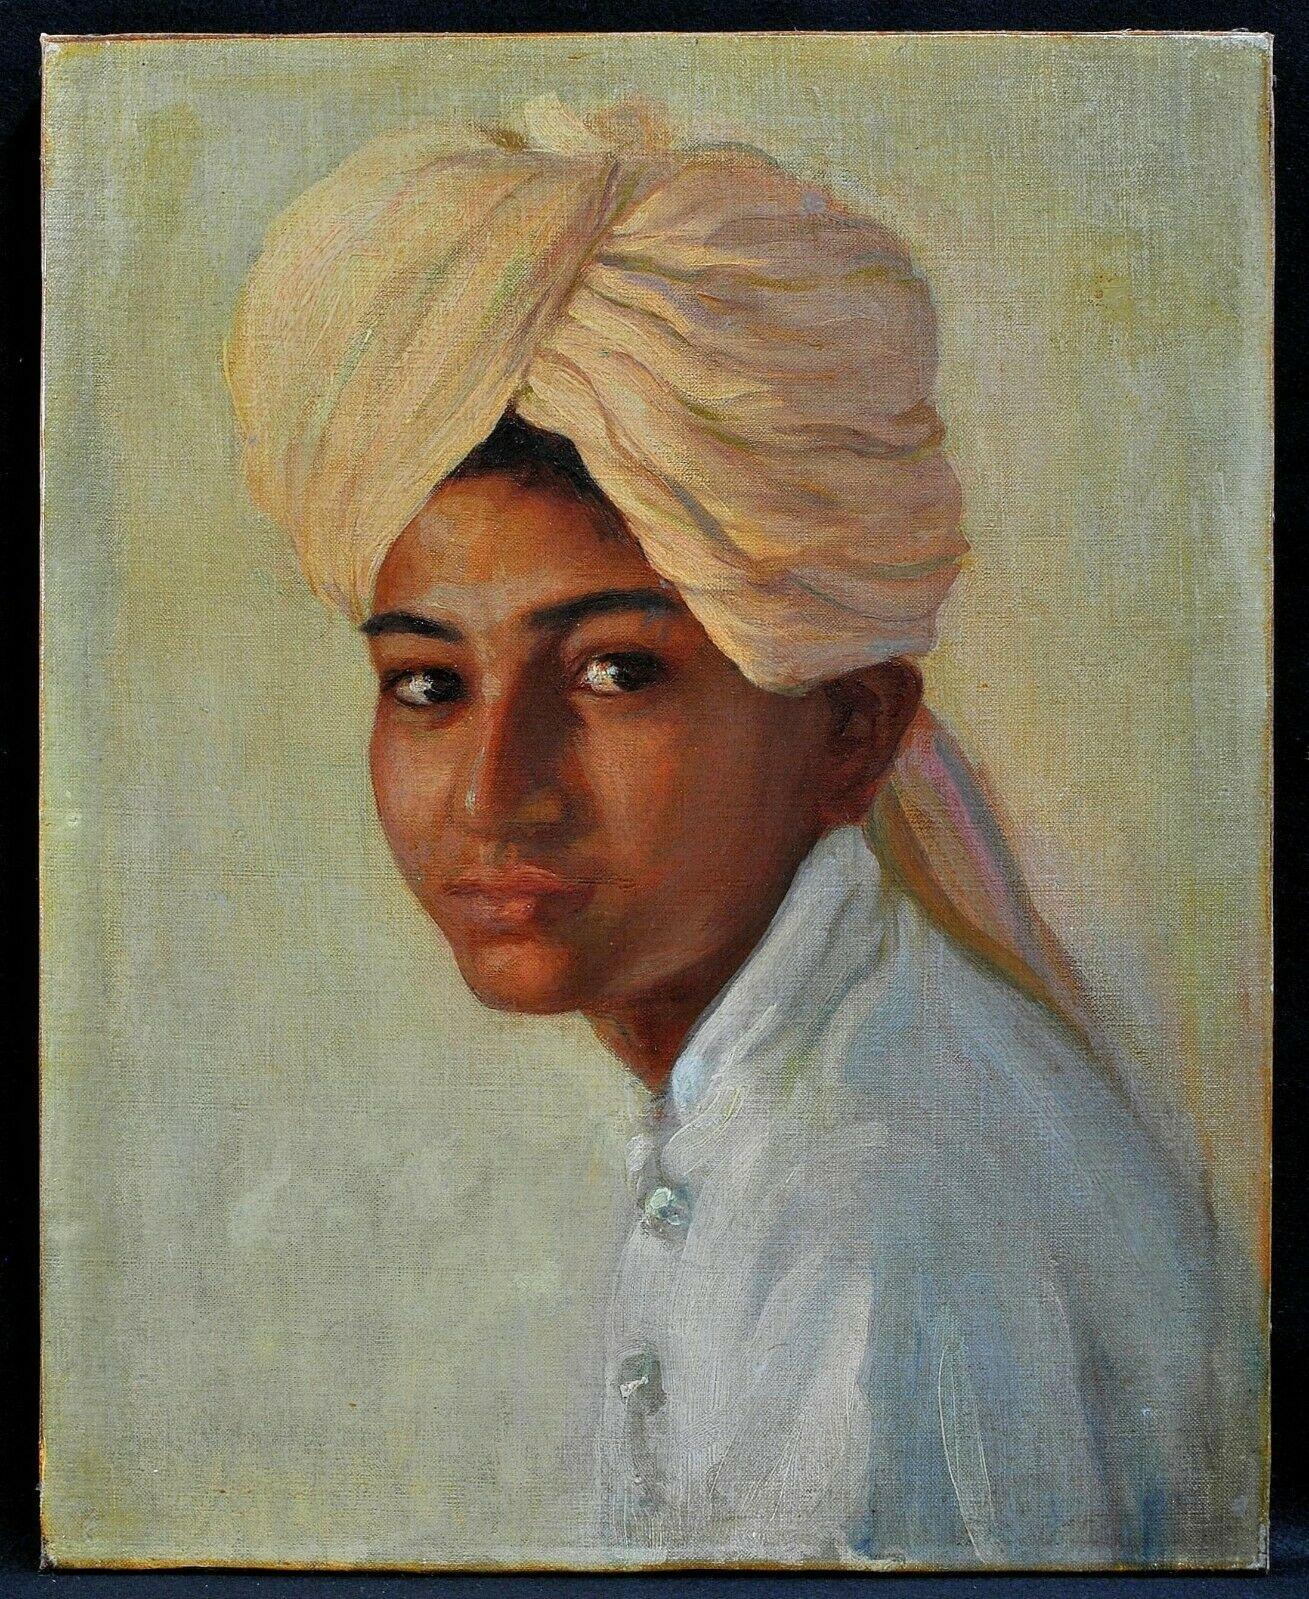 young sikh boy